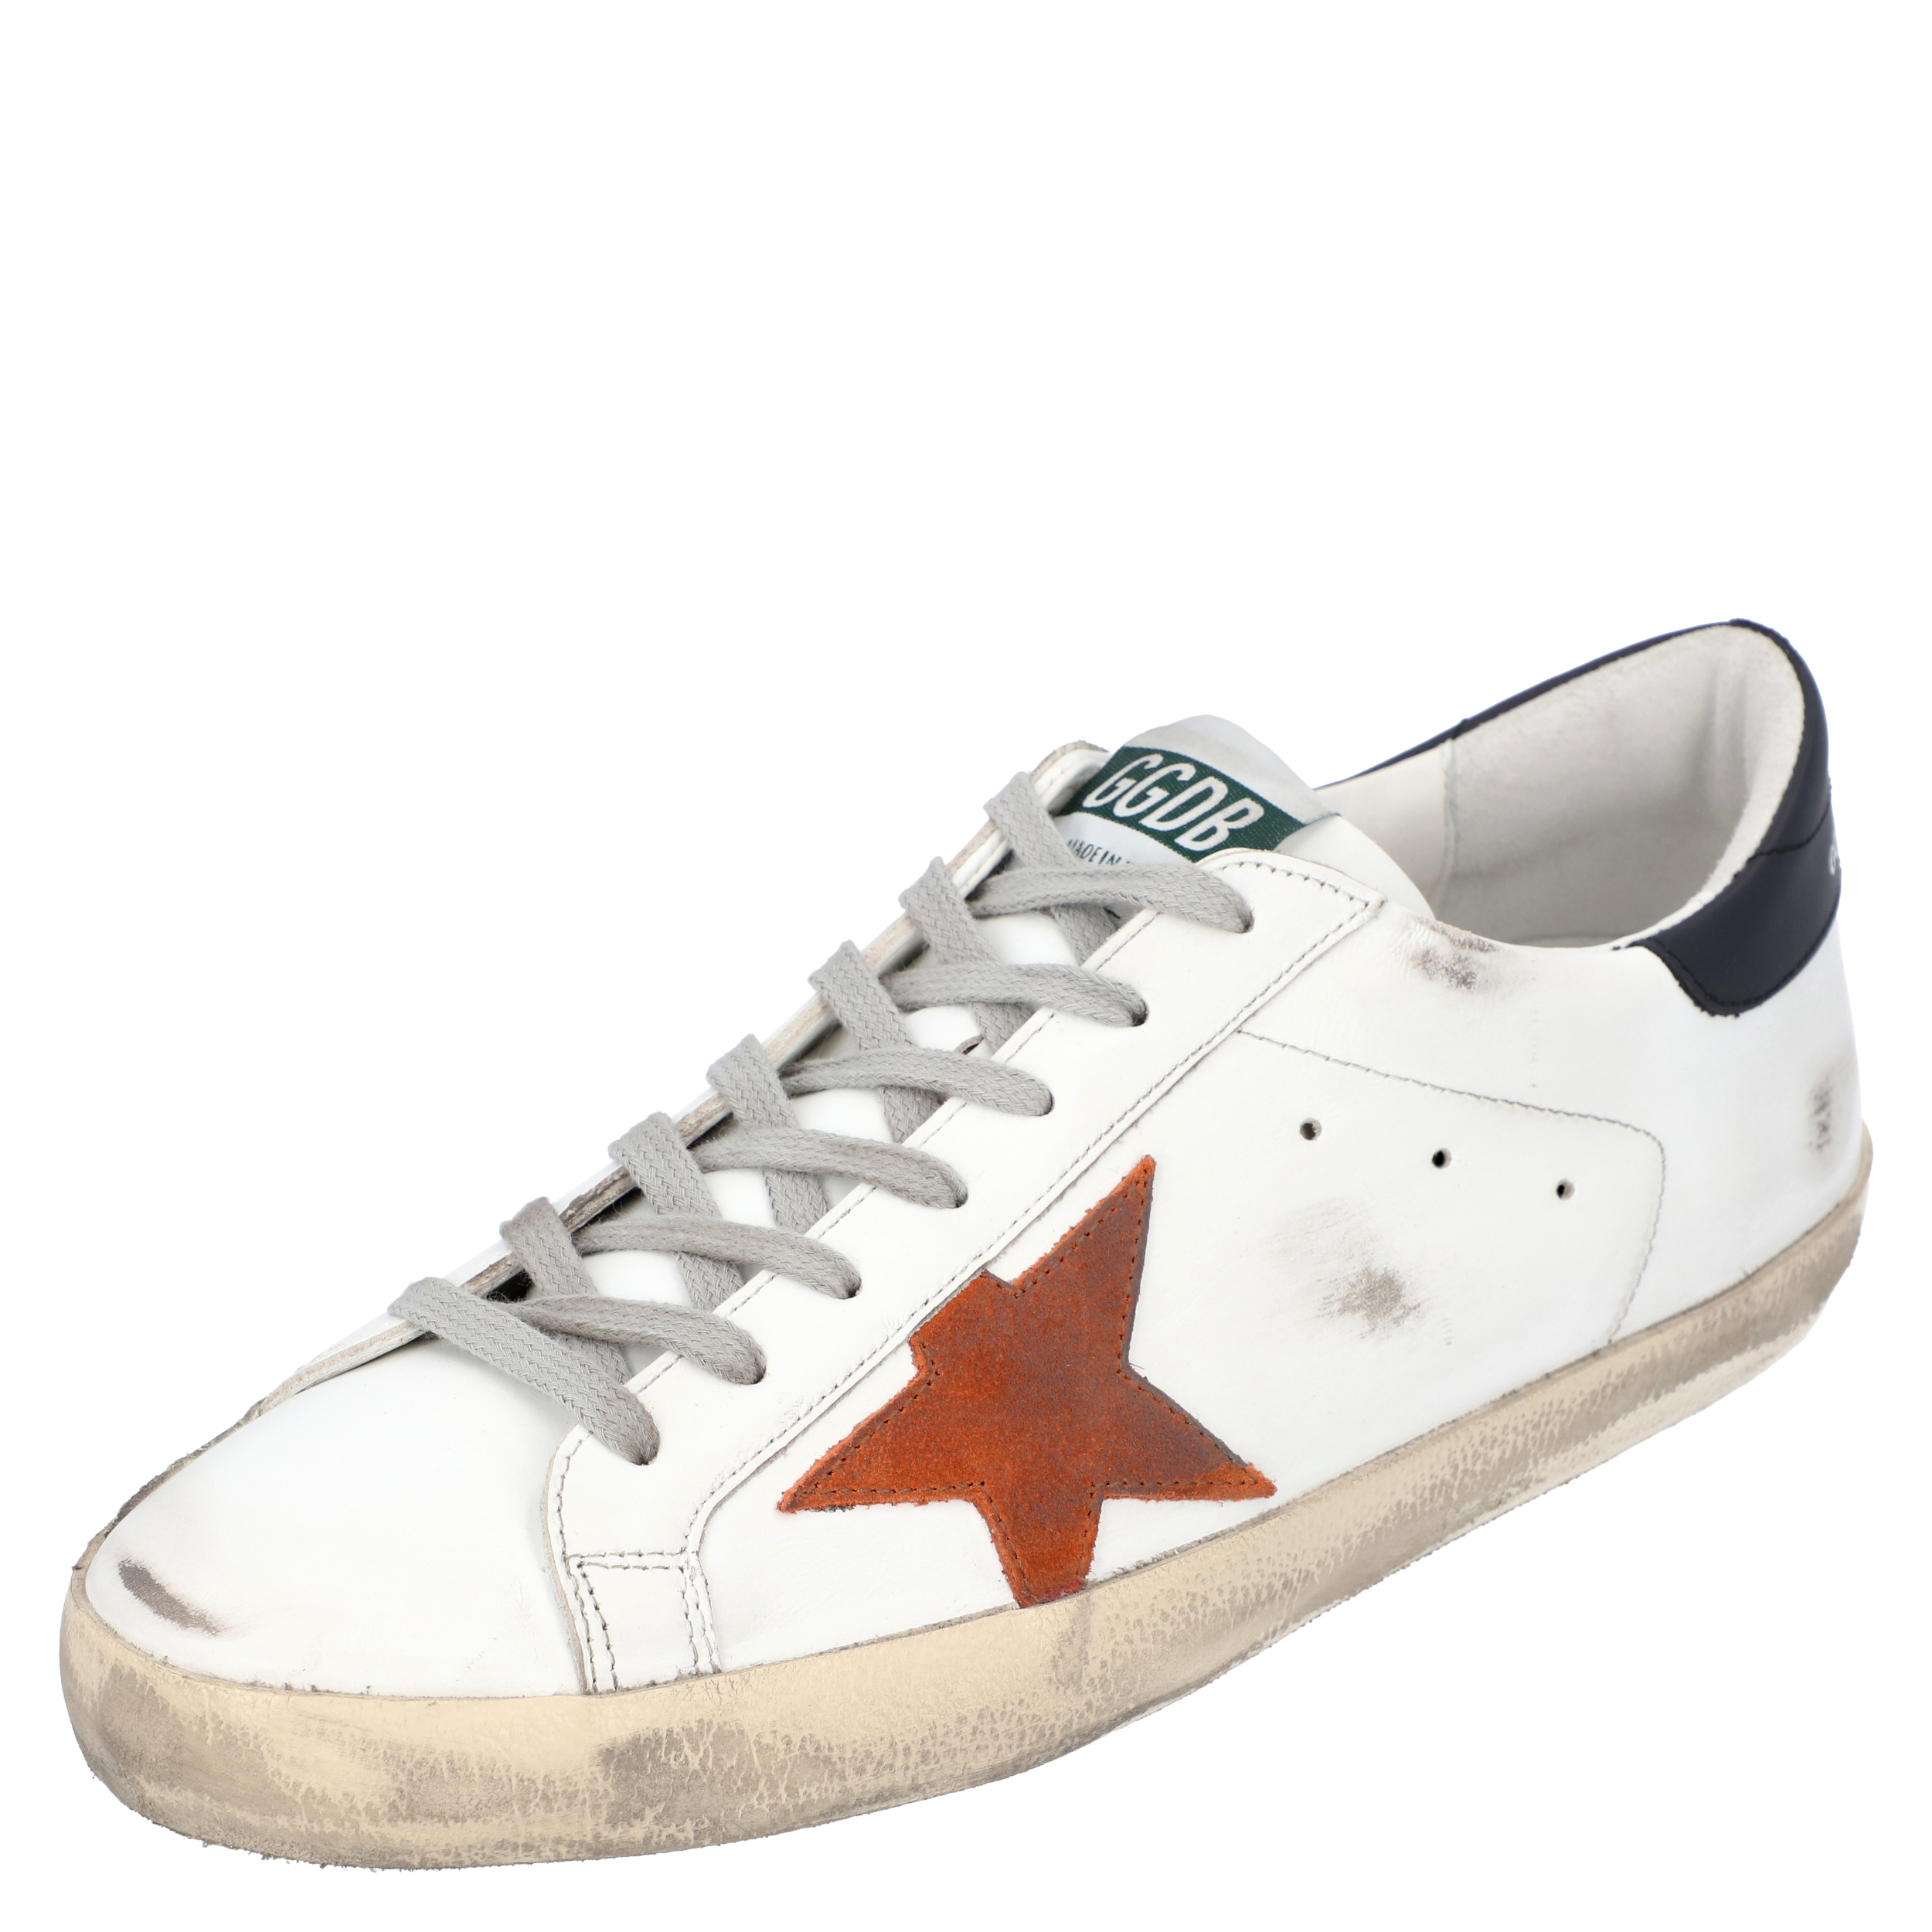 Golden Goose White / Black / Red Leather Superstar Sneakers Size EU 42